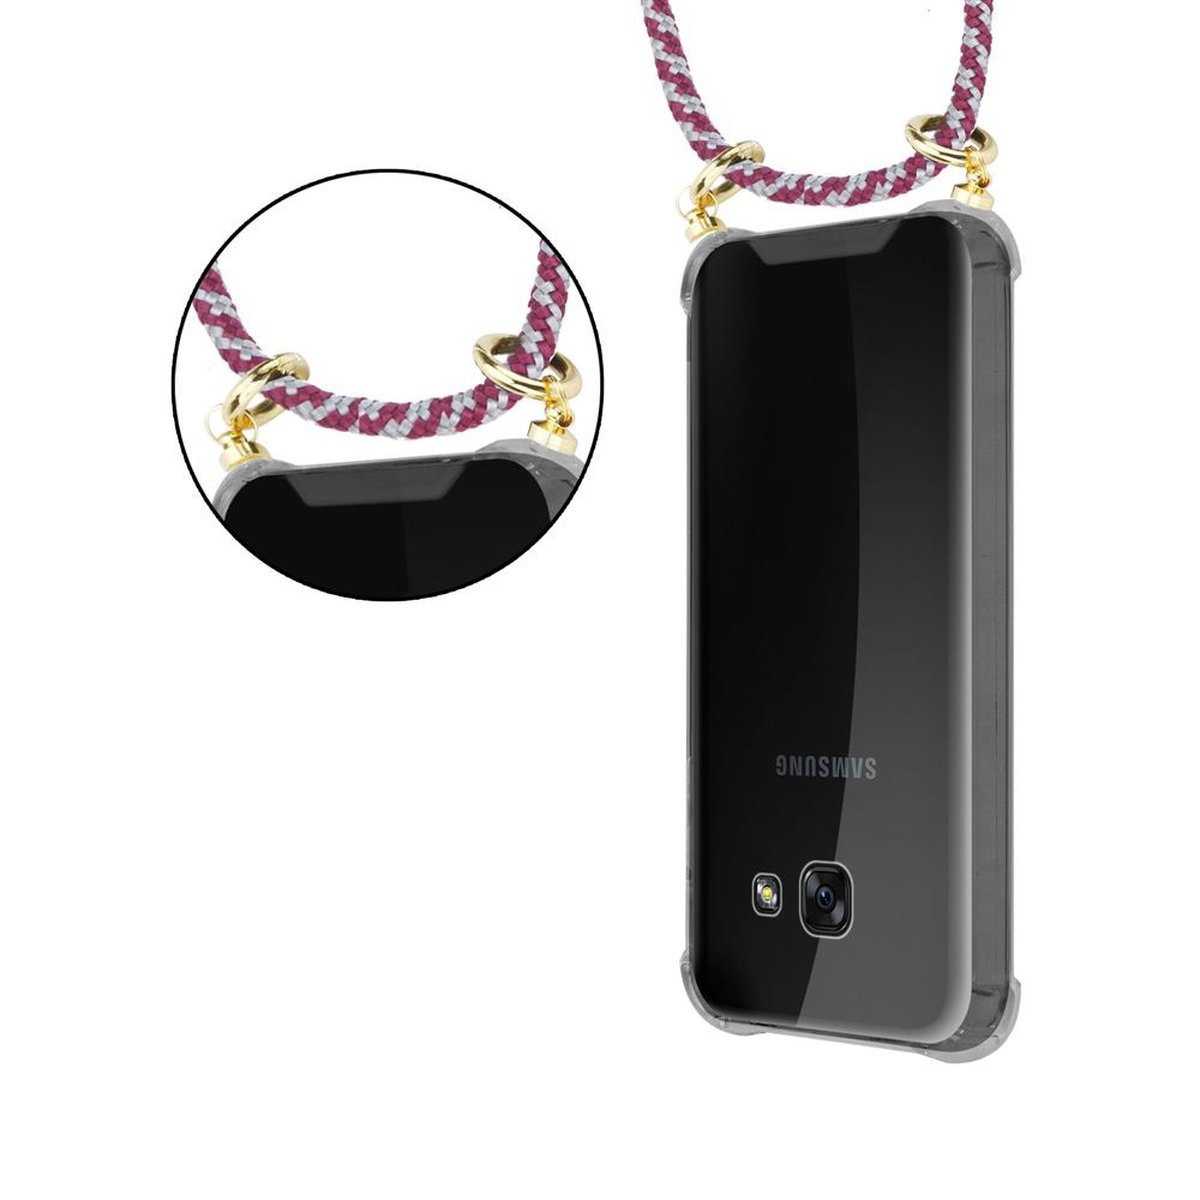 CADORABO Handy Backcover, Band Hülle, ROT 2017, abnehmbarer mit Samsung, Gold Galaxy WEIß A3 Ringen, und Kette Kordel